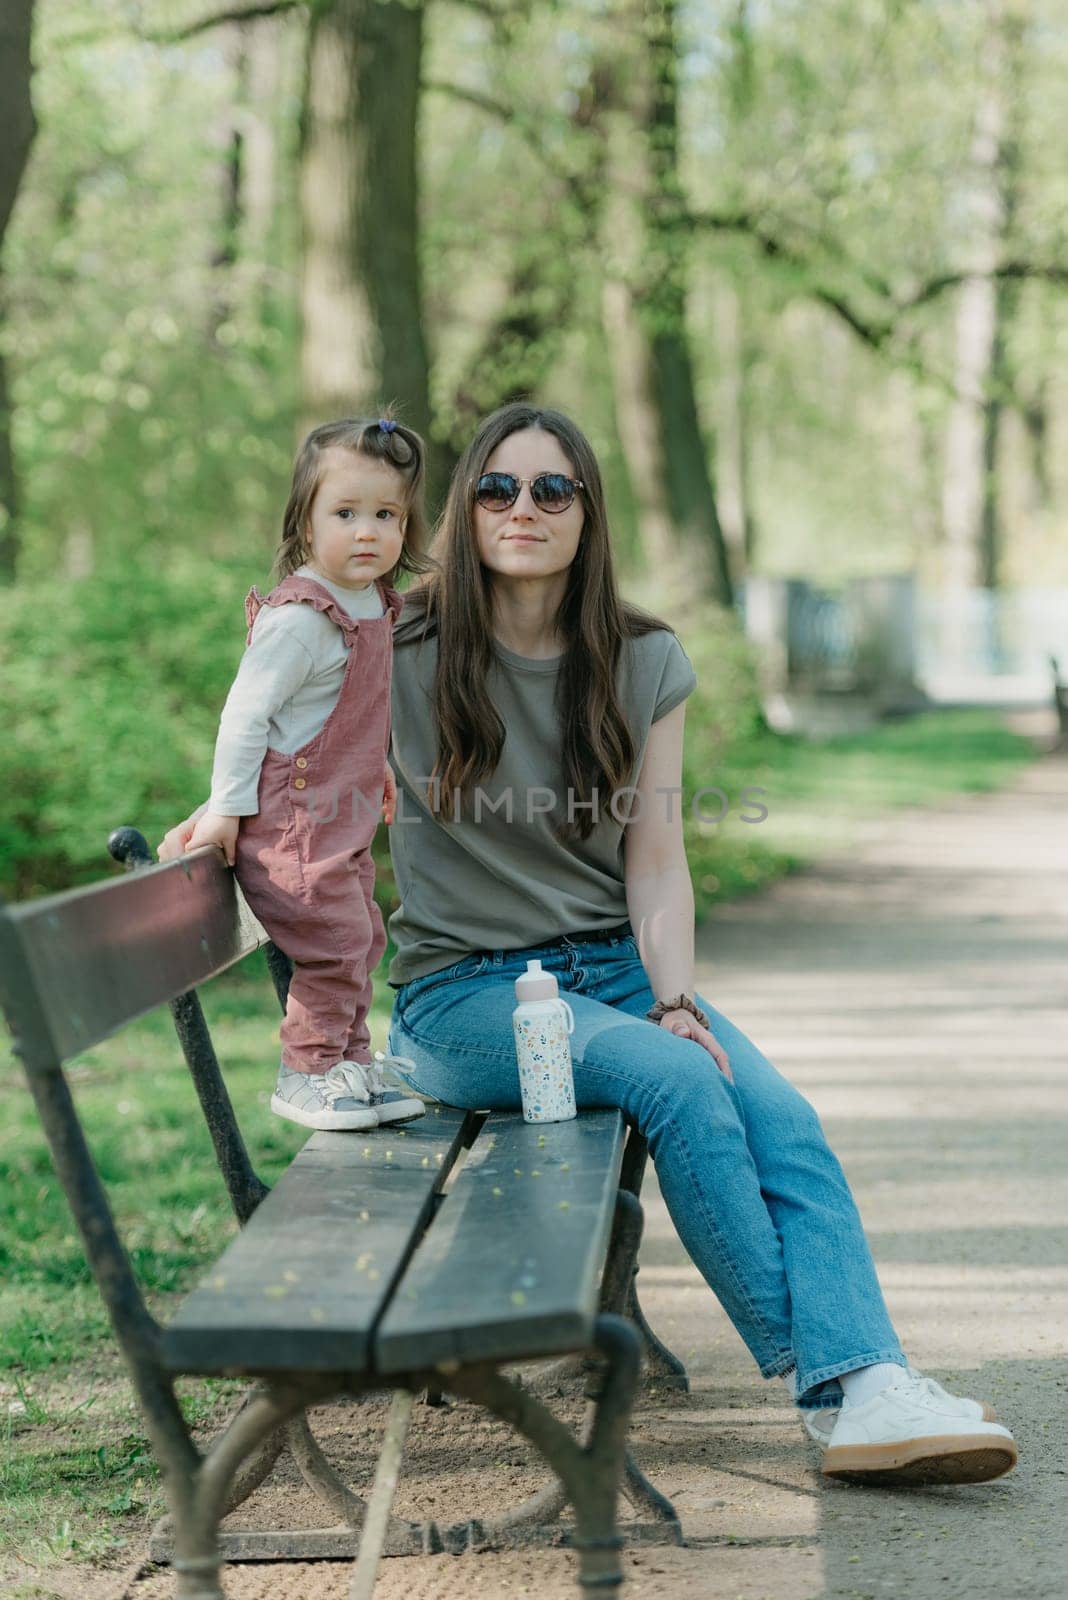 A female toddler in velvet overall is on the bench with her mother. by RomanJRoyce